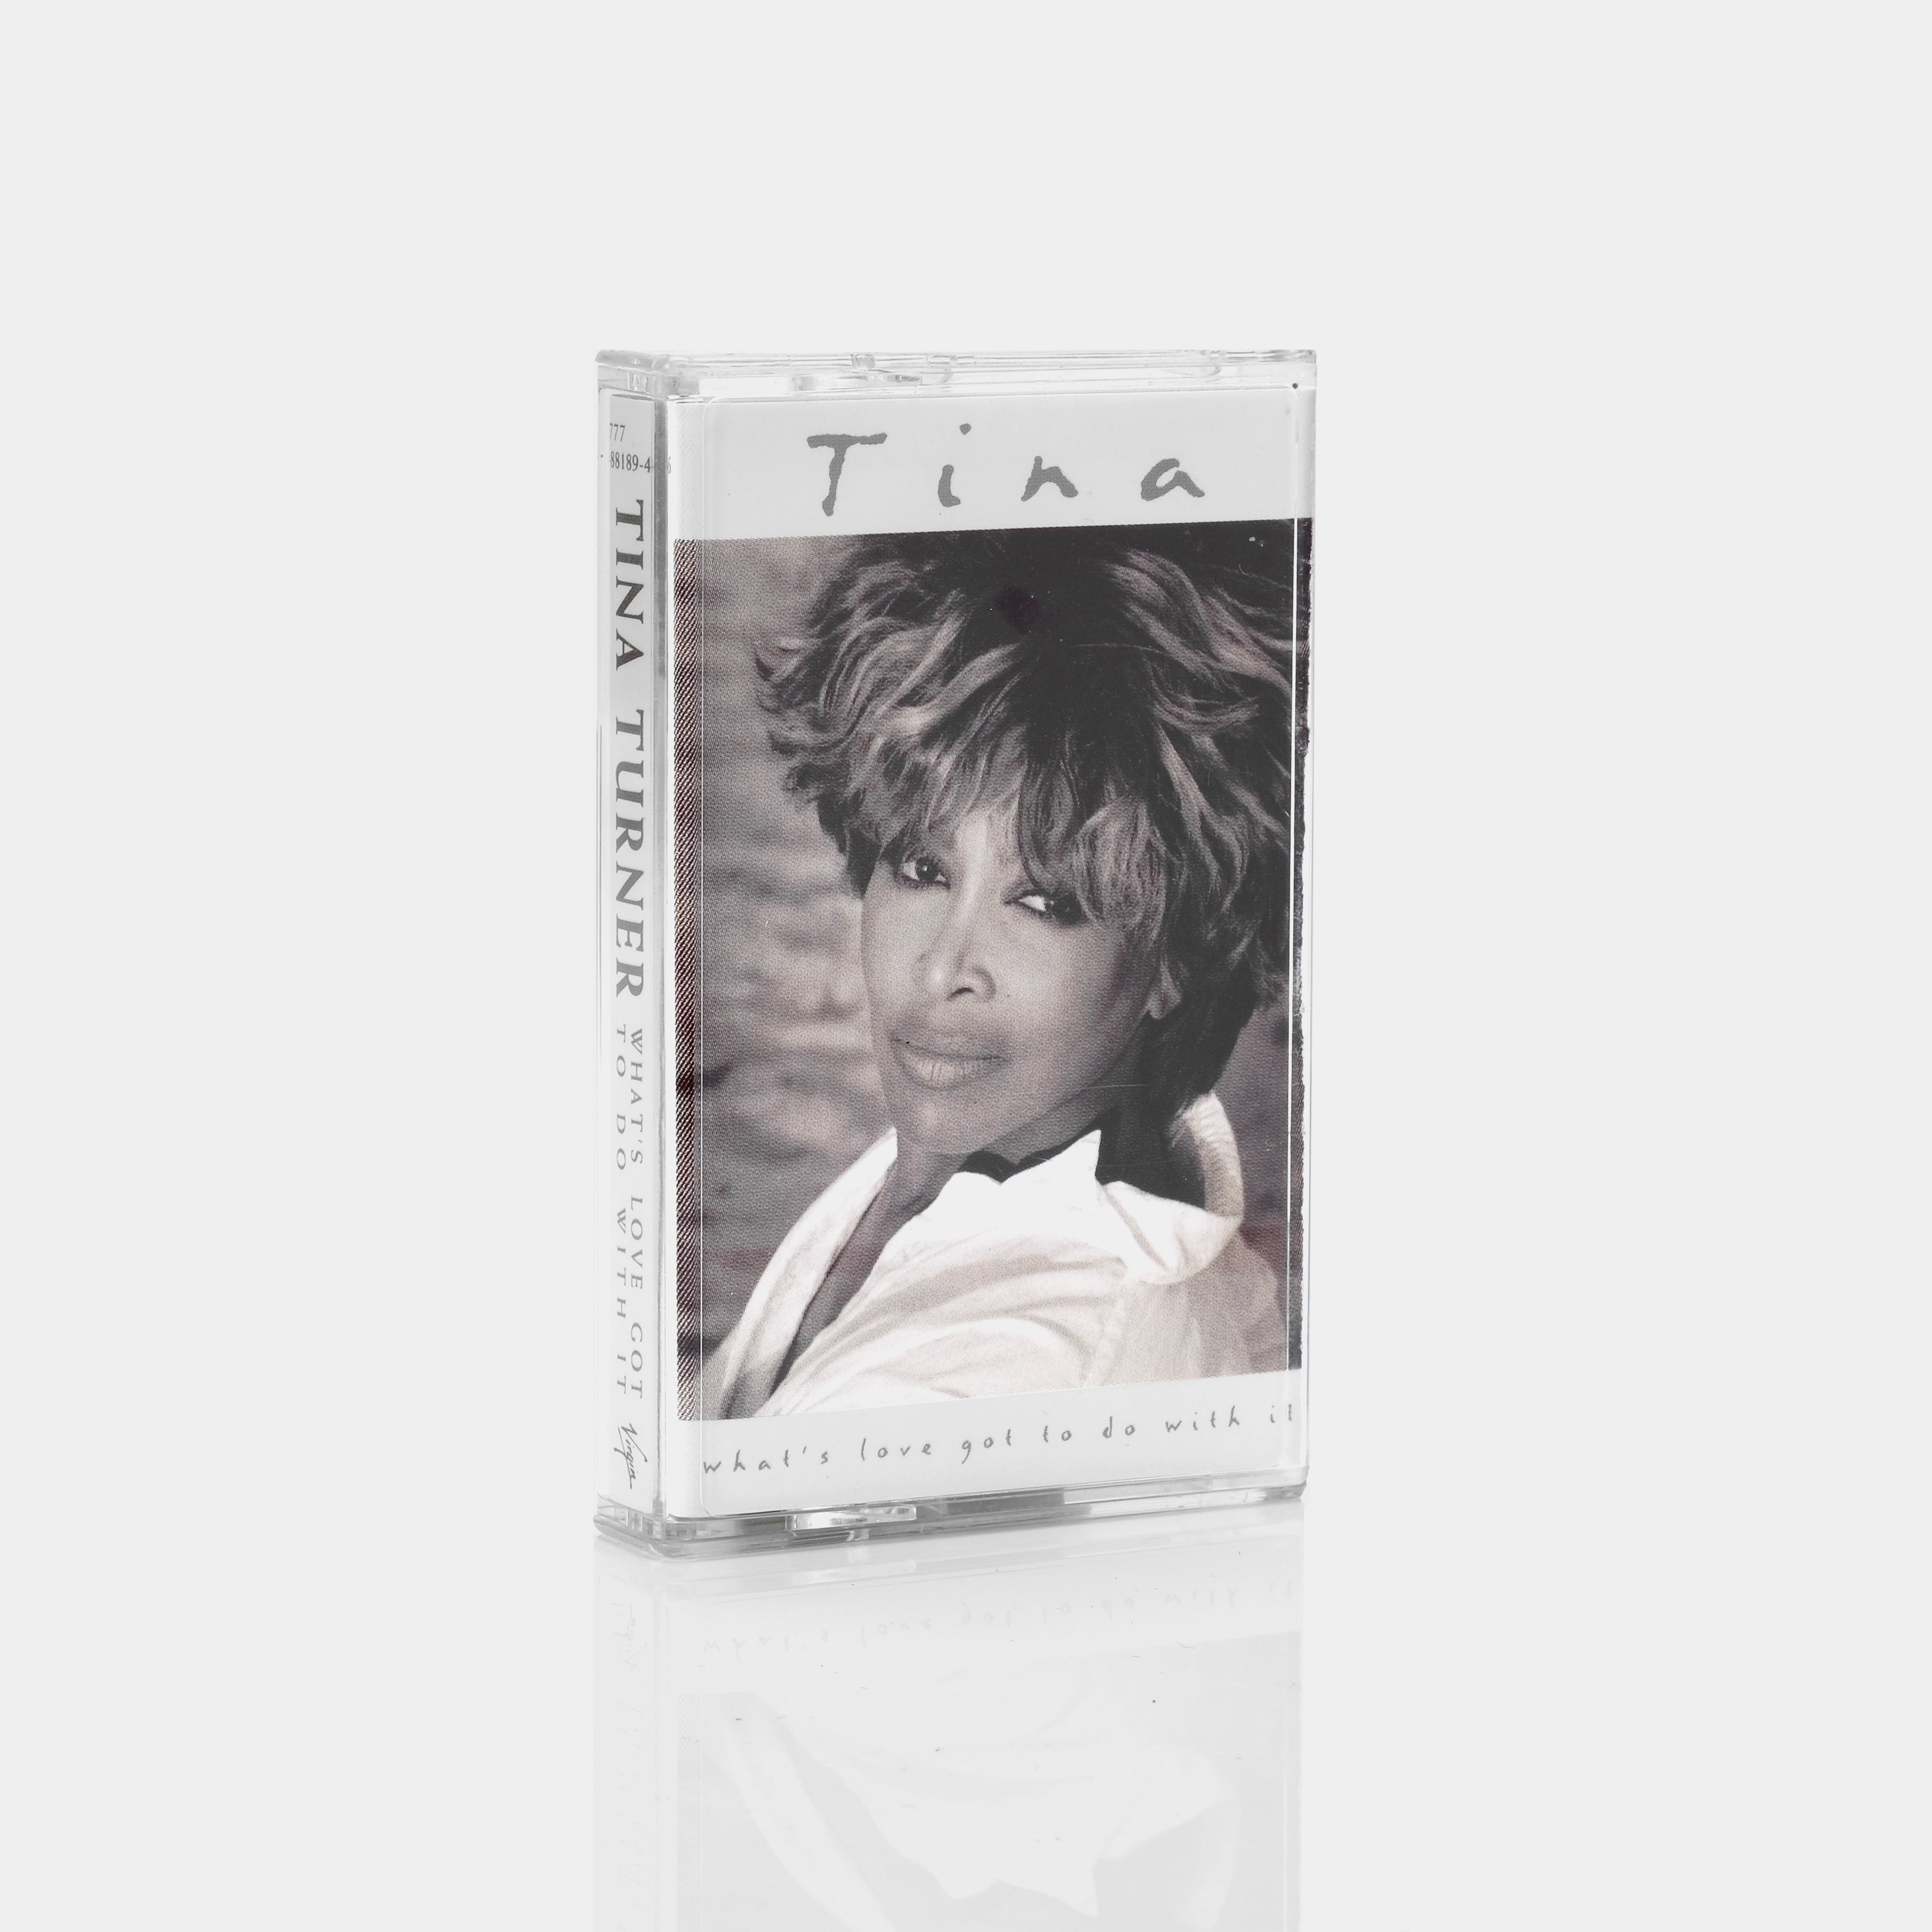 Tina Turner - What's Love Got To Do With It? Cassette Tape